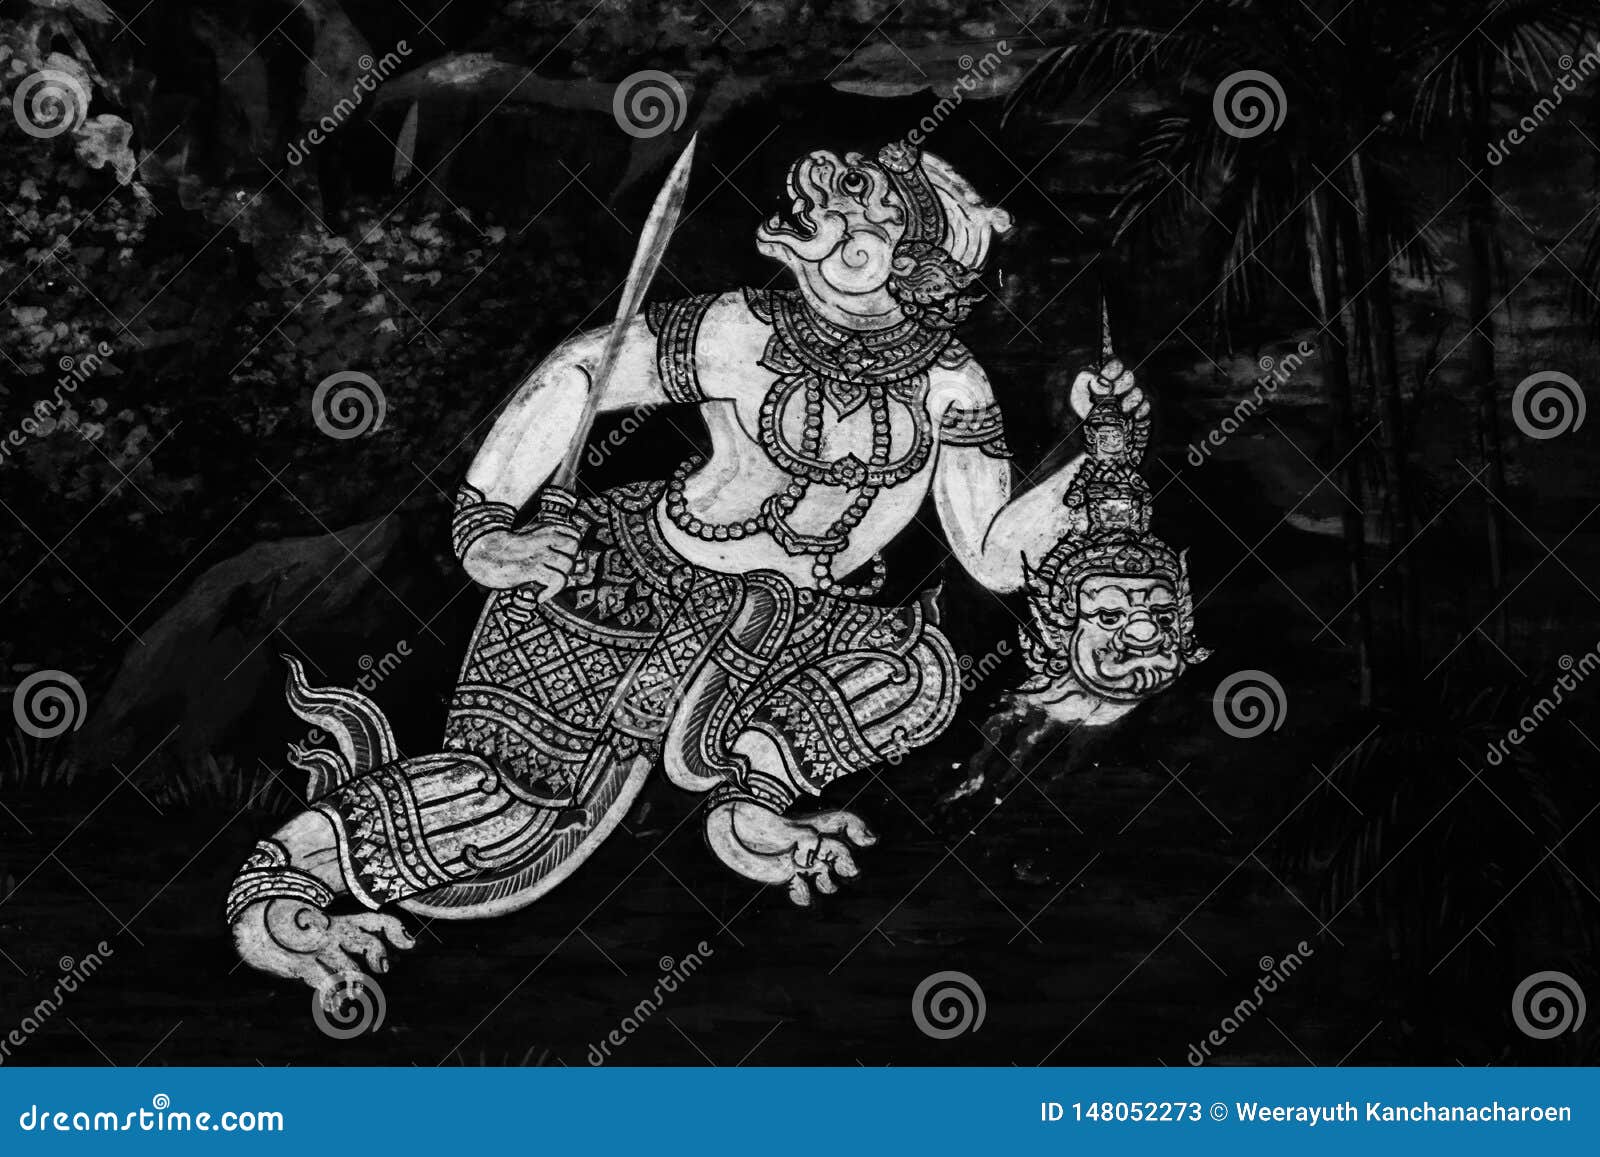 The Ramakian Ramayana Mural Paintings Are Black And White